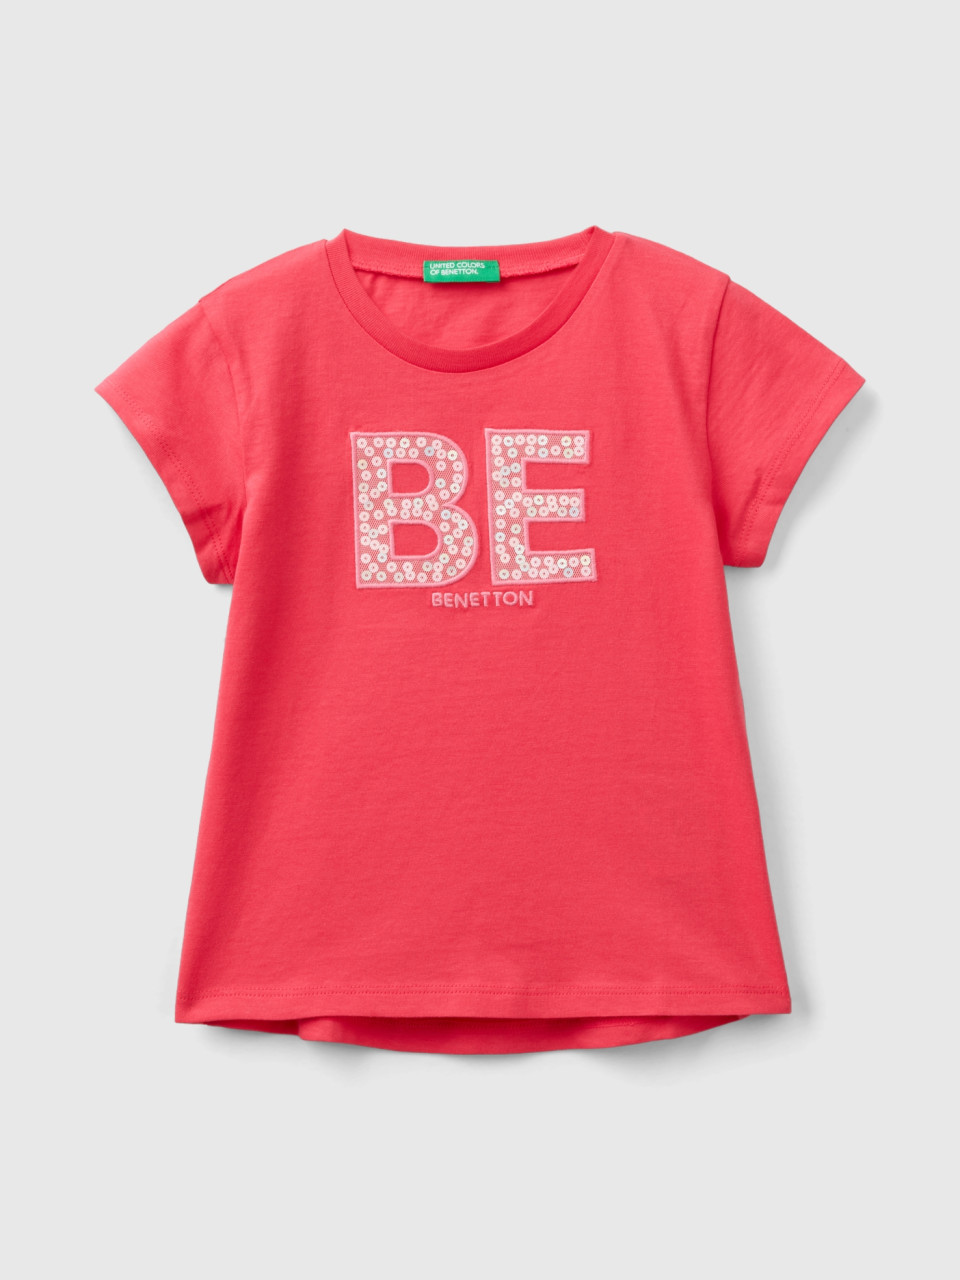 Benetton, T-shirt In Organic Cotton With Embroidered Logo, Fuchsia, Kids